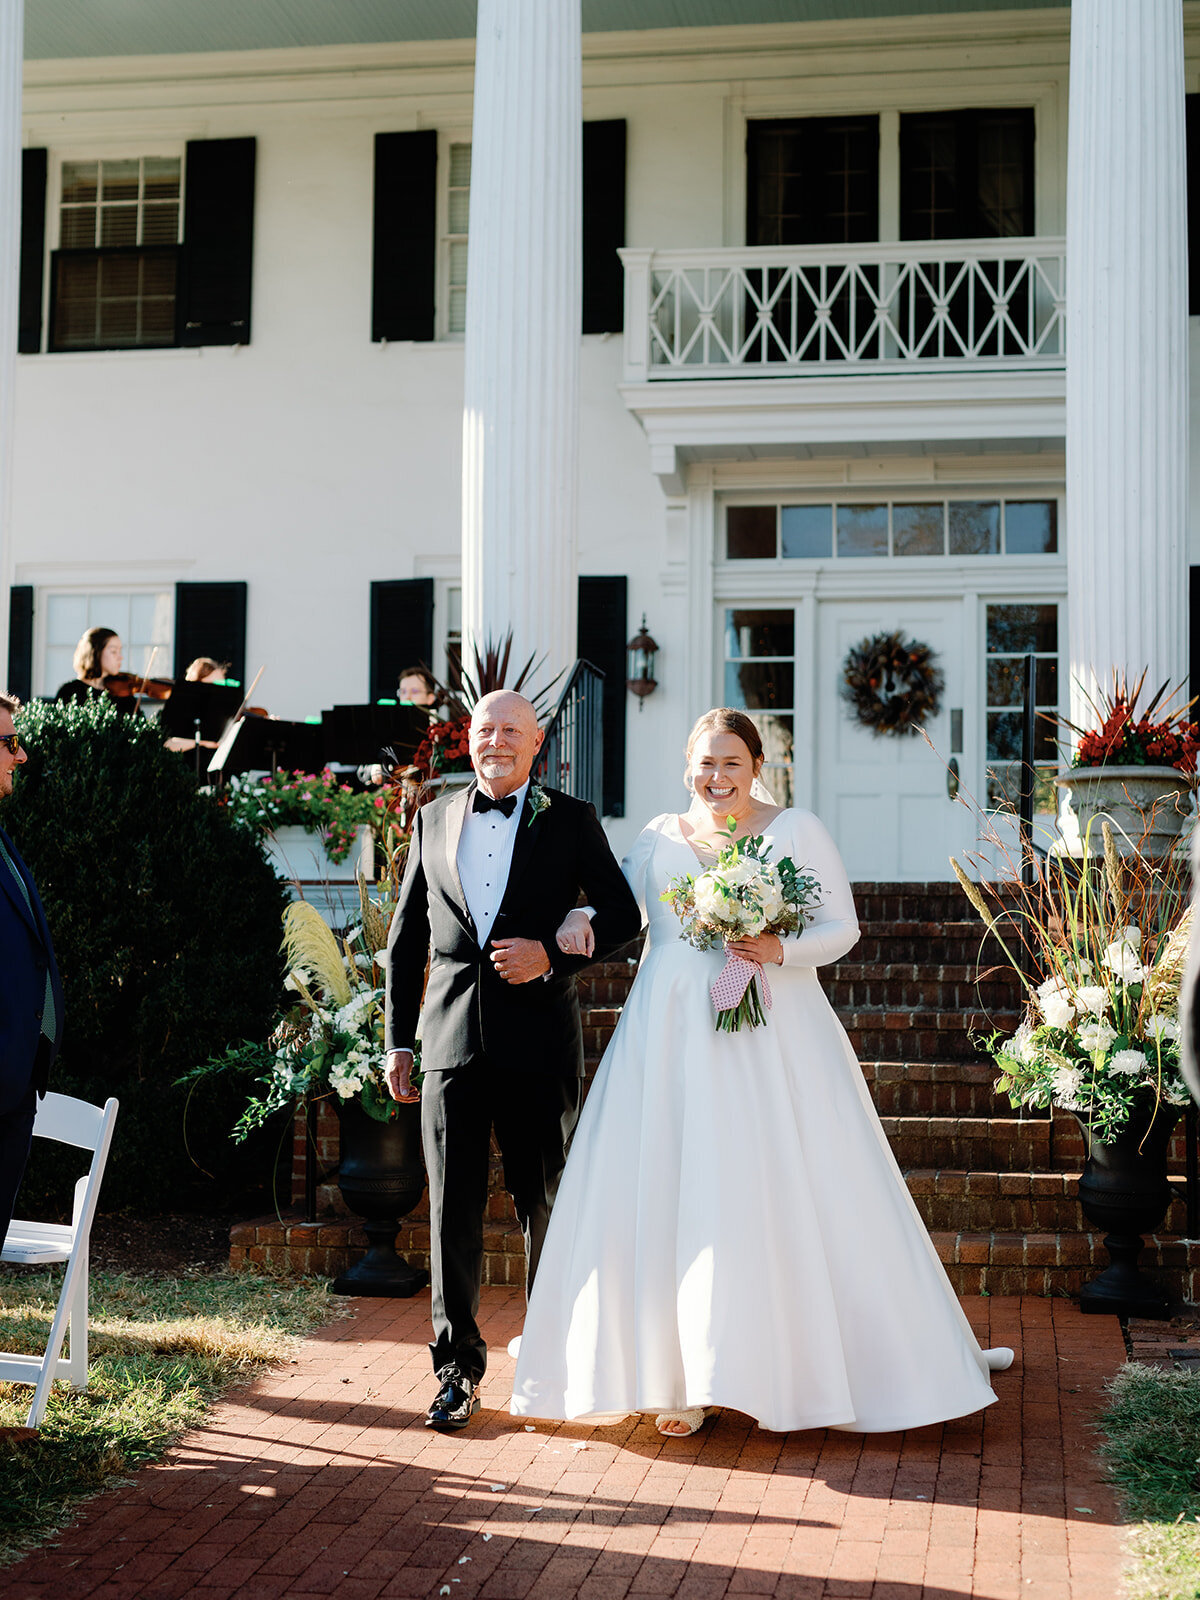 Bride and her dad walk down the aisle at rosemont manor